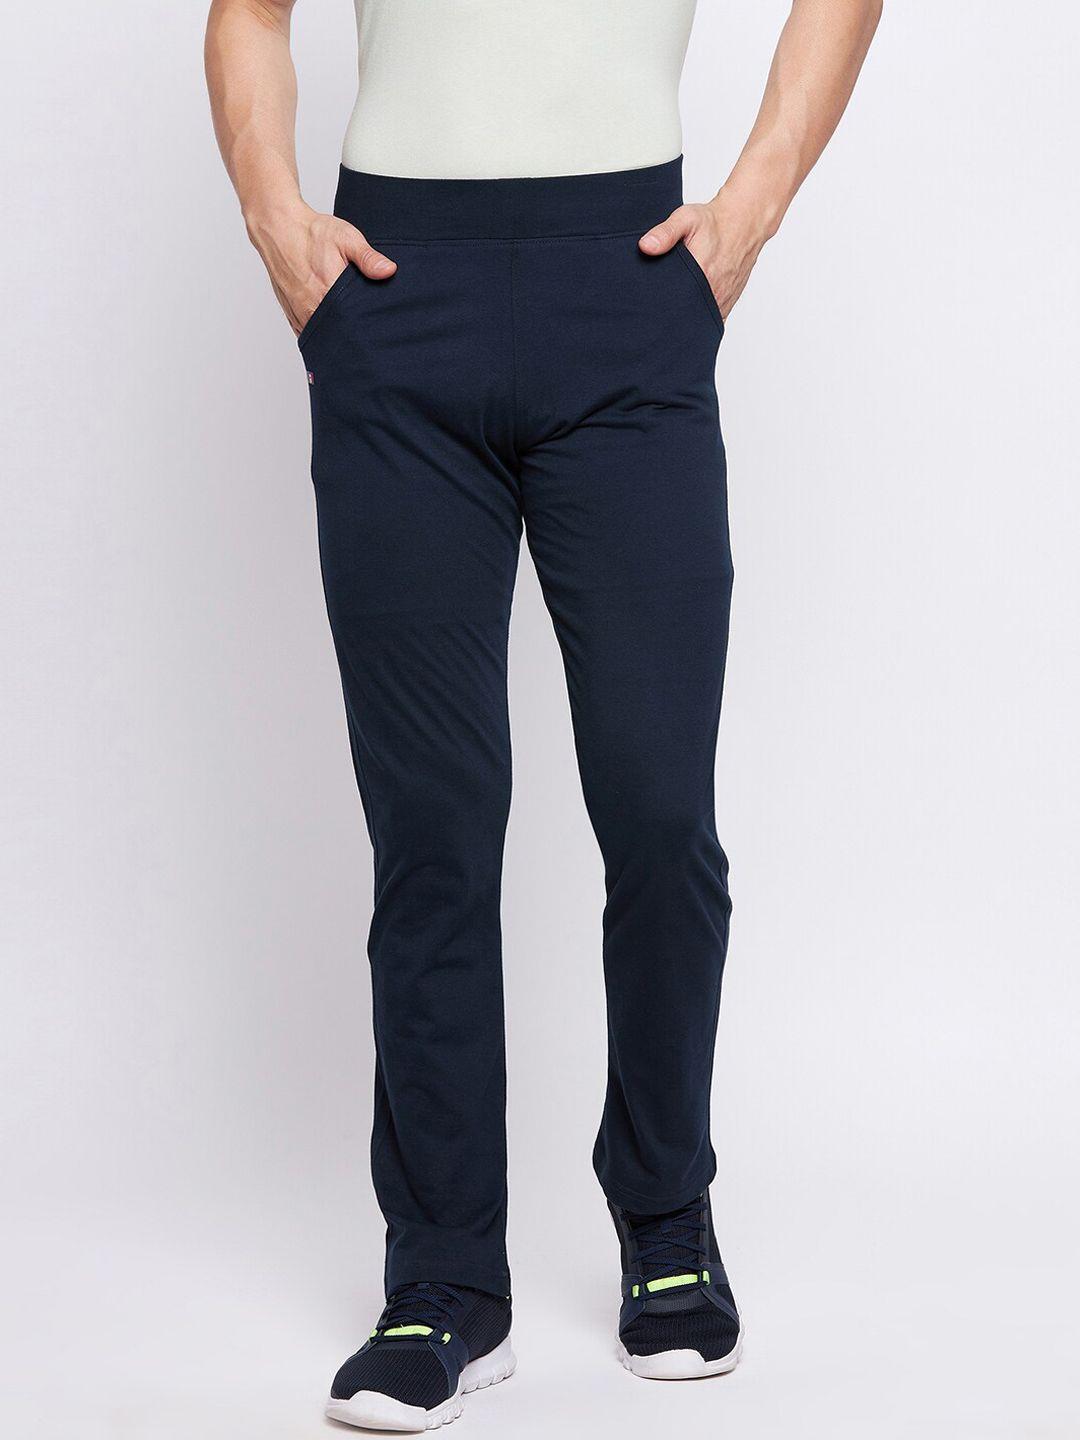 french flexious men navy blue solid straight fit track pants